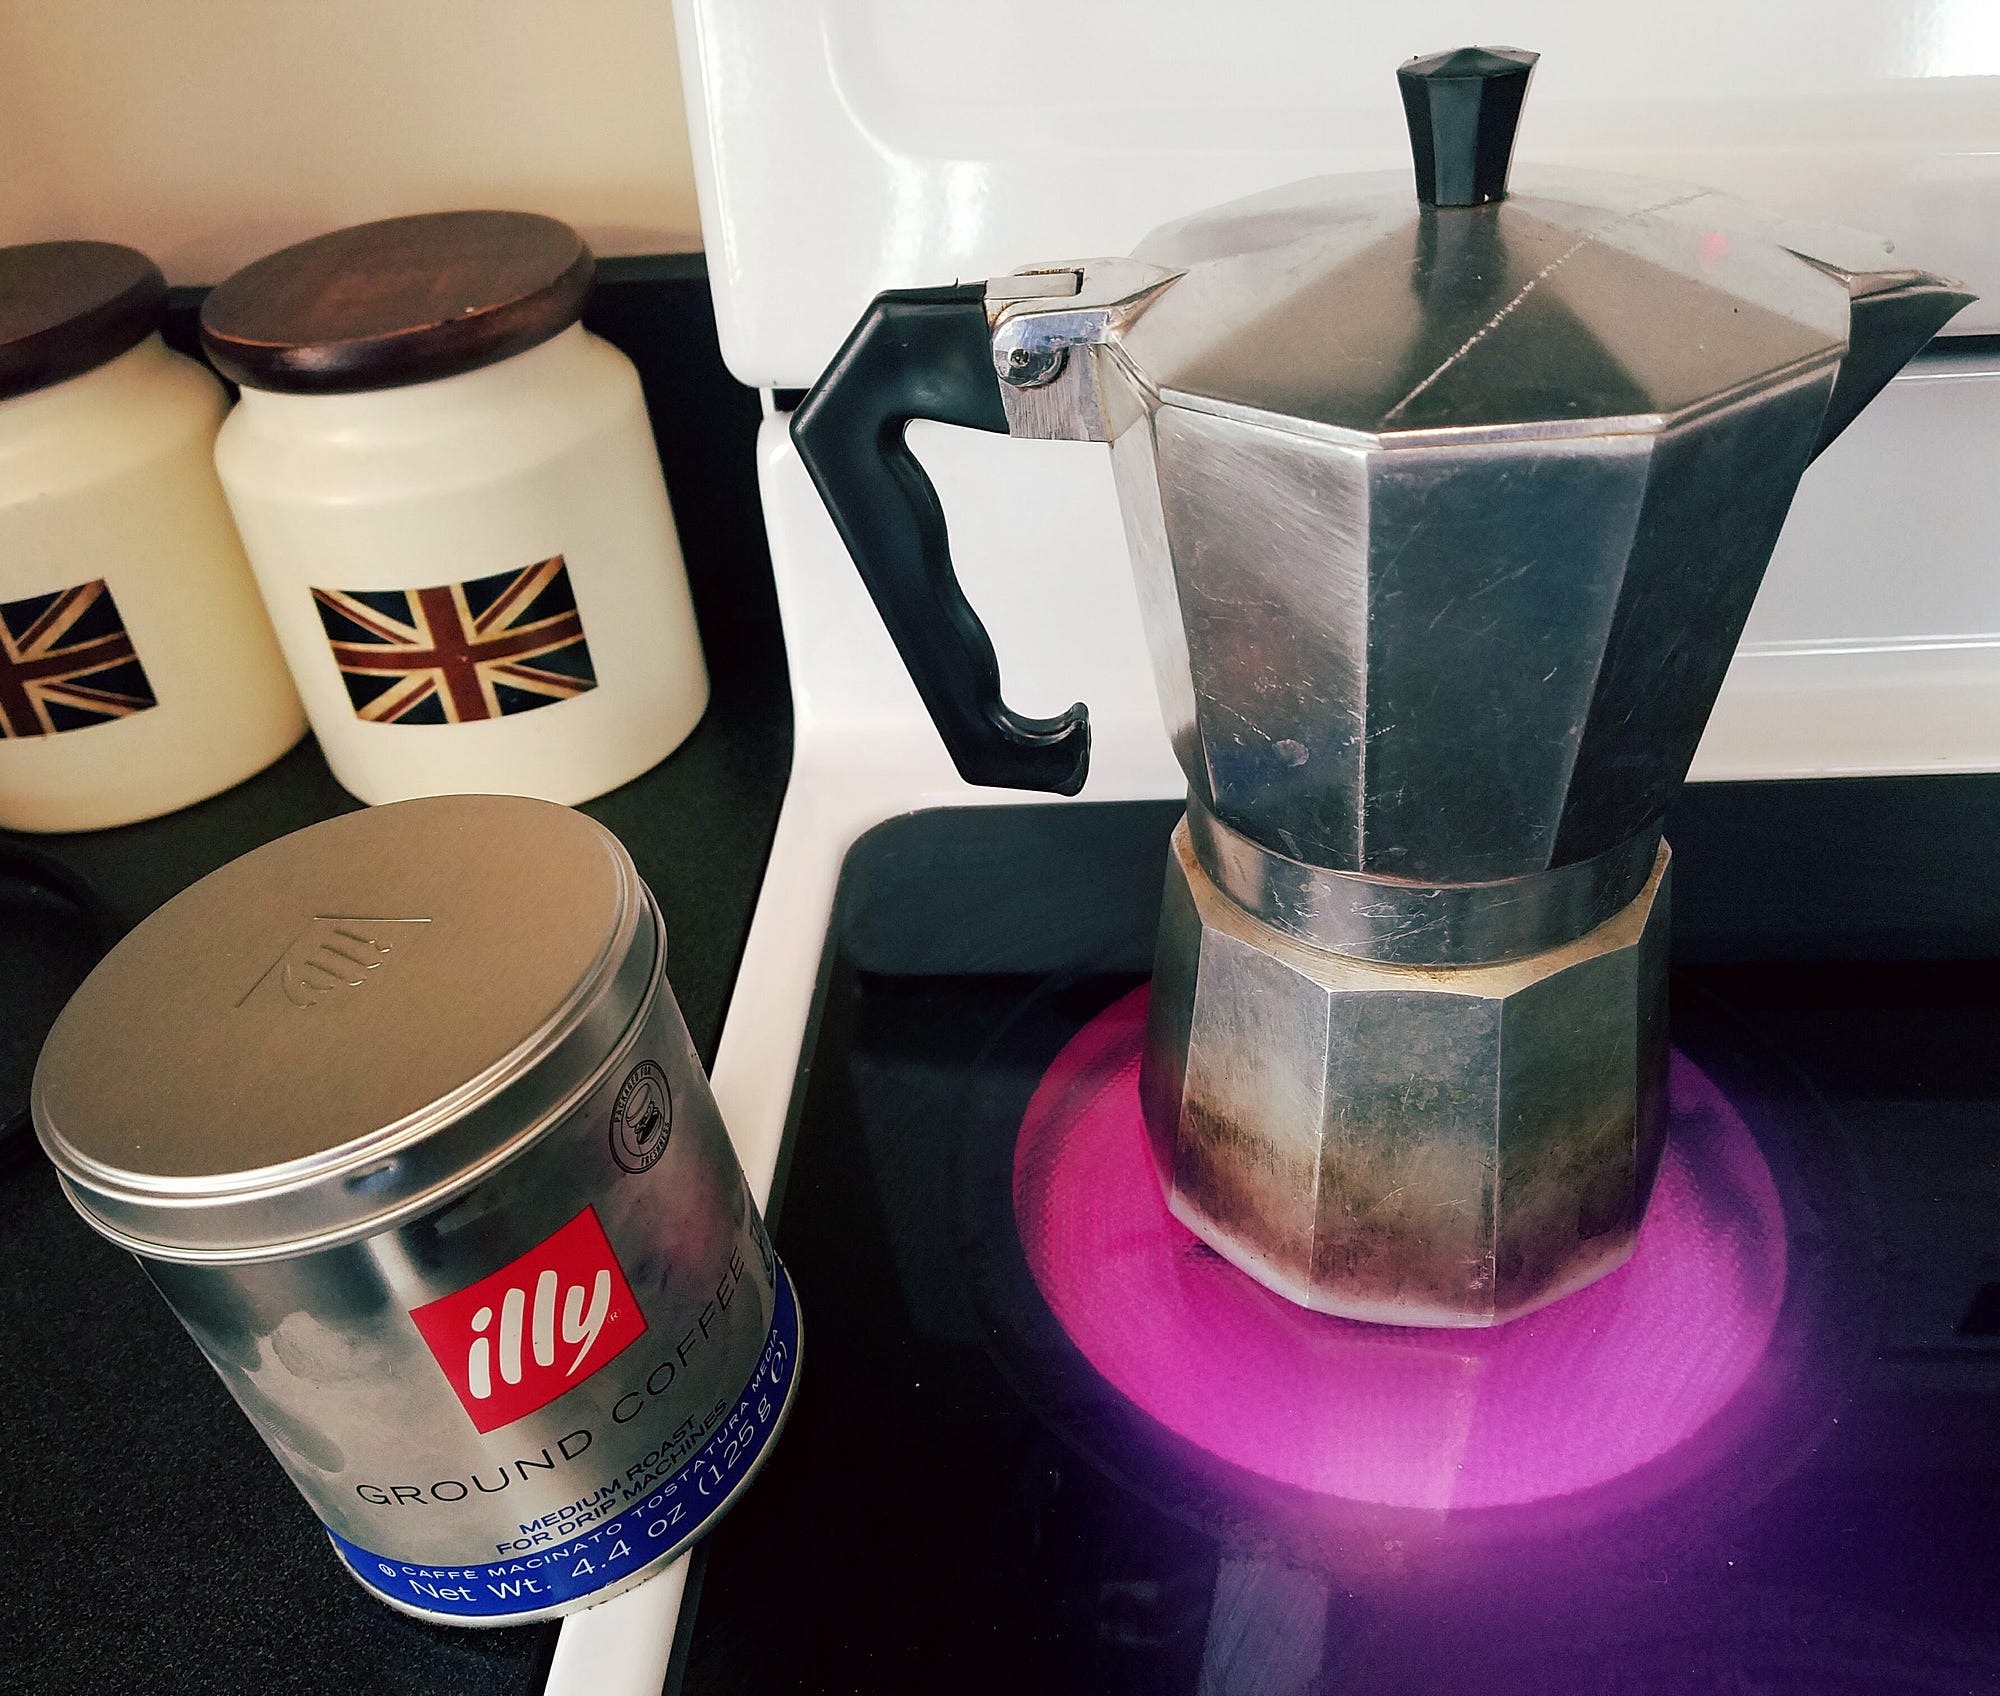 Acculturation (It's like making American coffee with a European coffee-maker), by Teacher Hamish